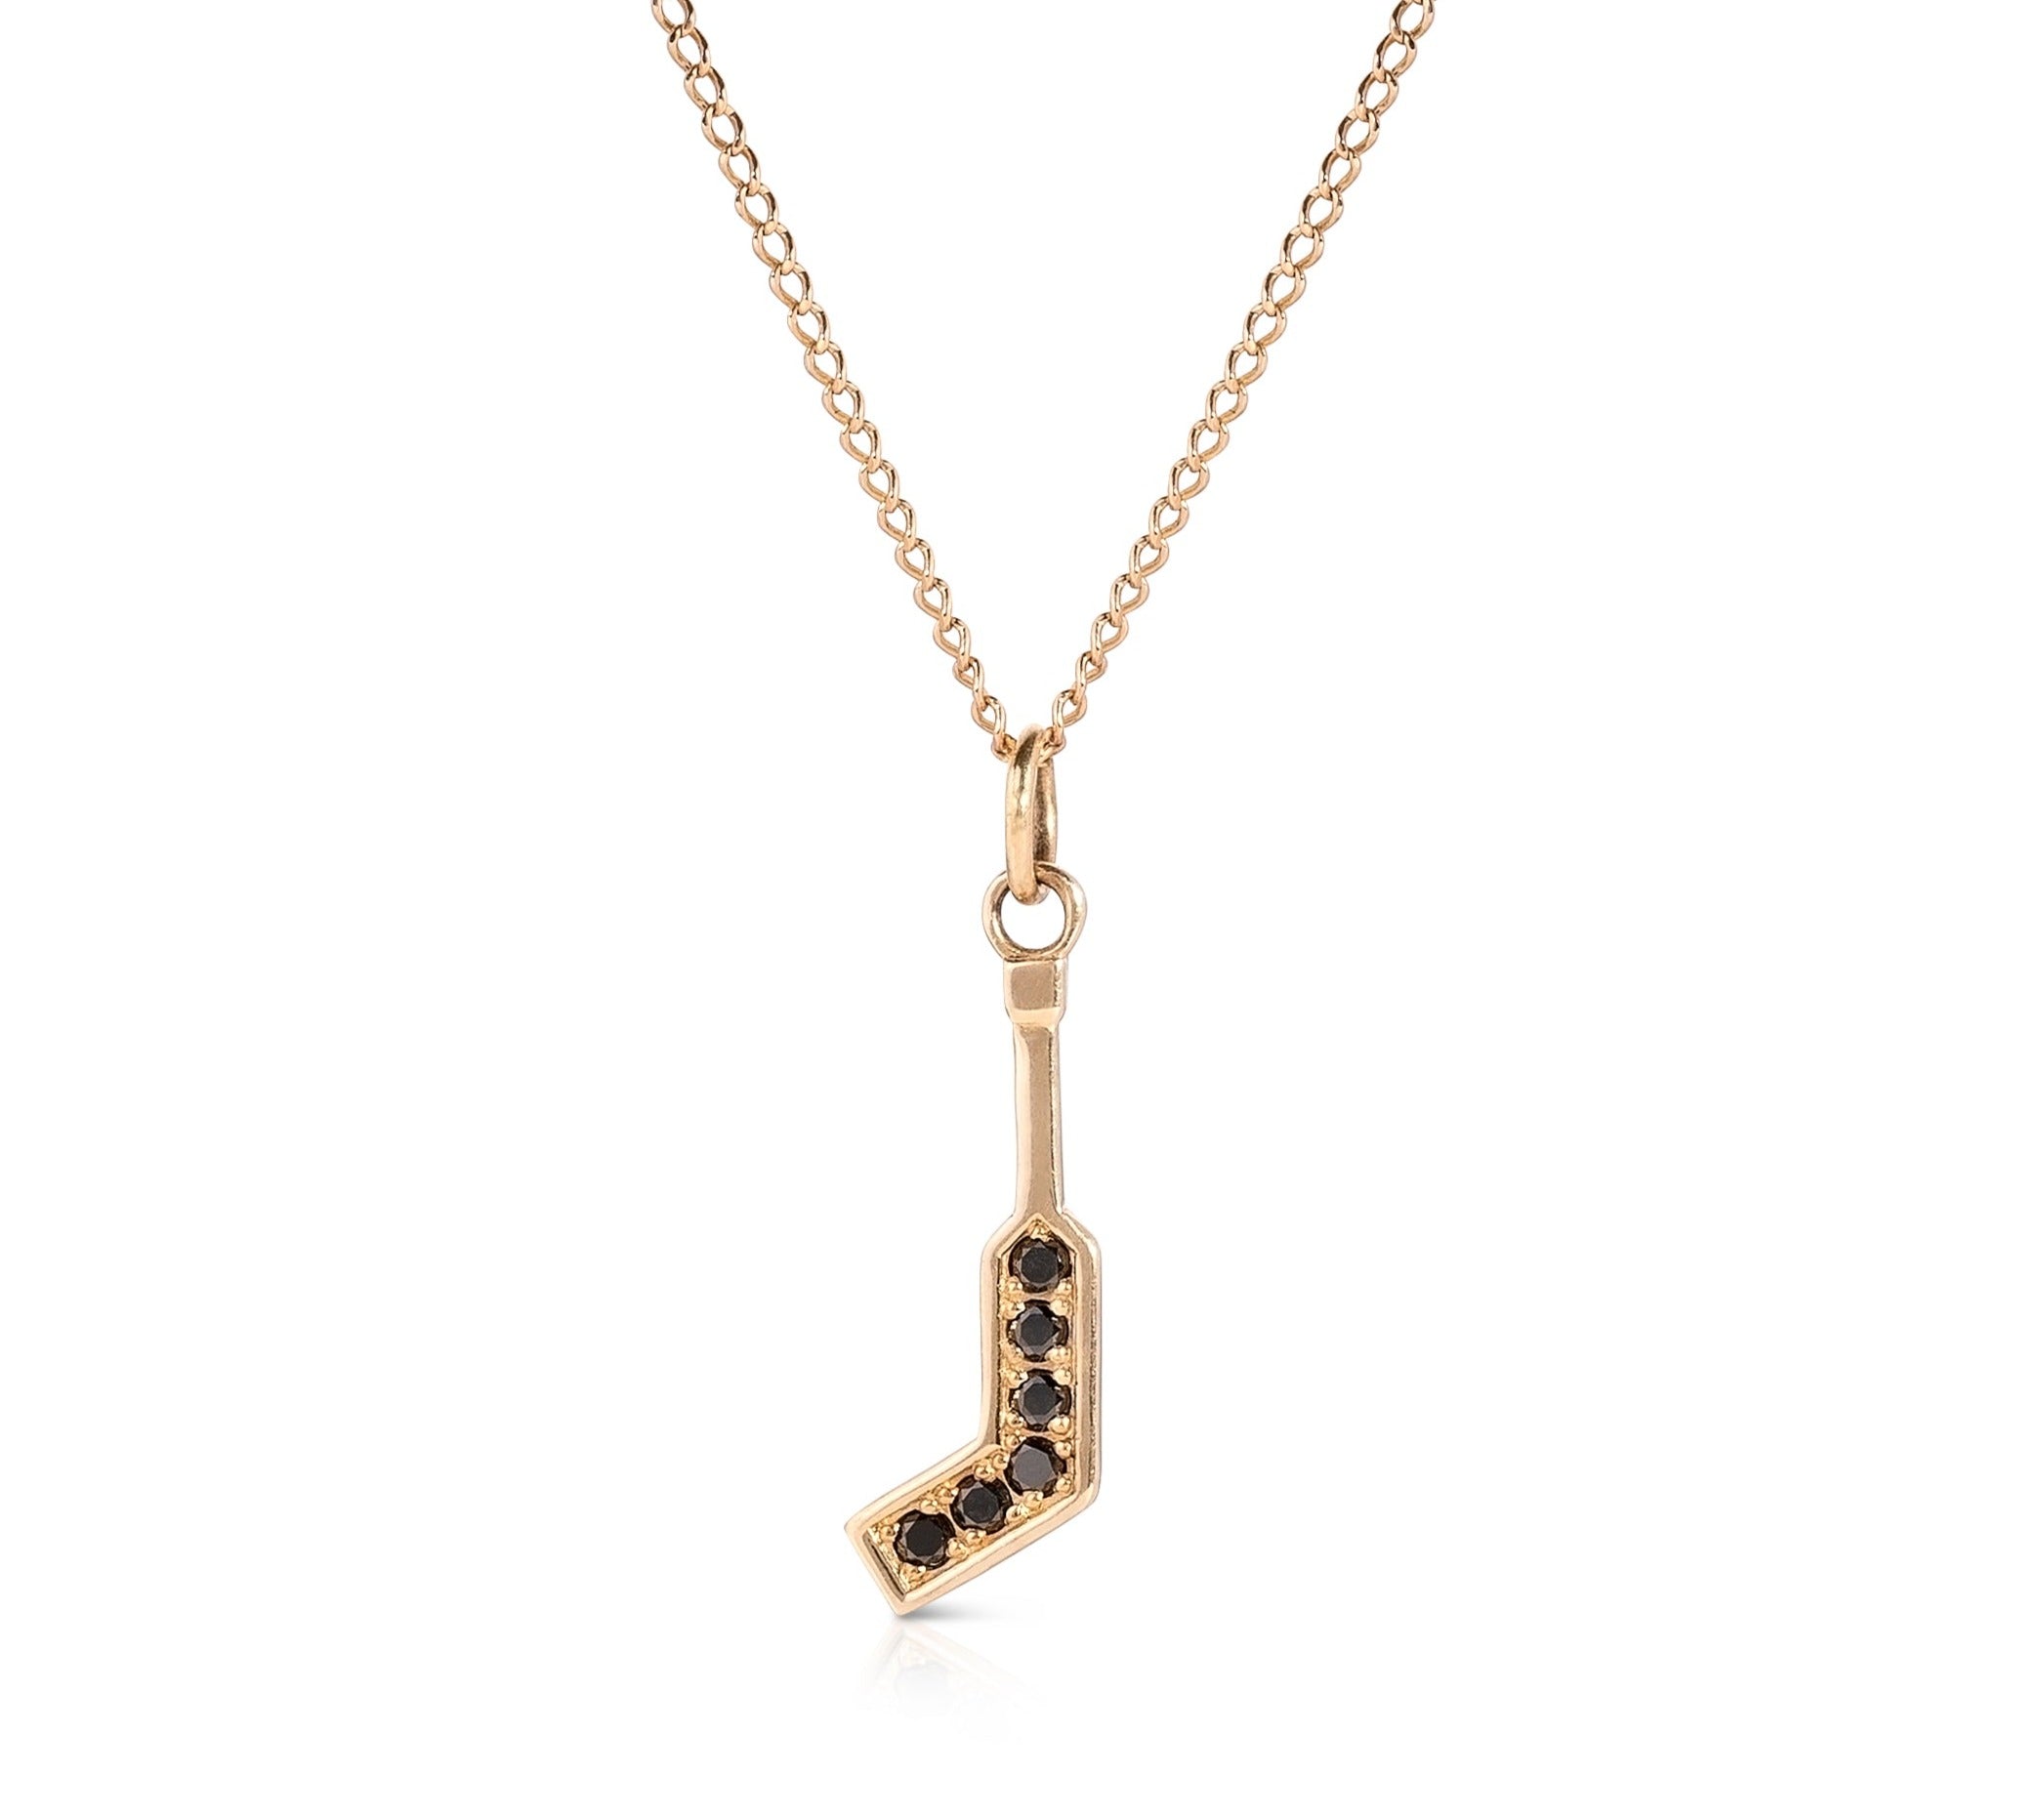 14K Goalie Stick and Black Diamonds Necklace (only one available)